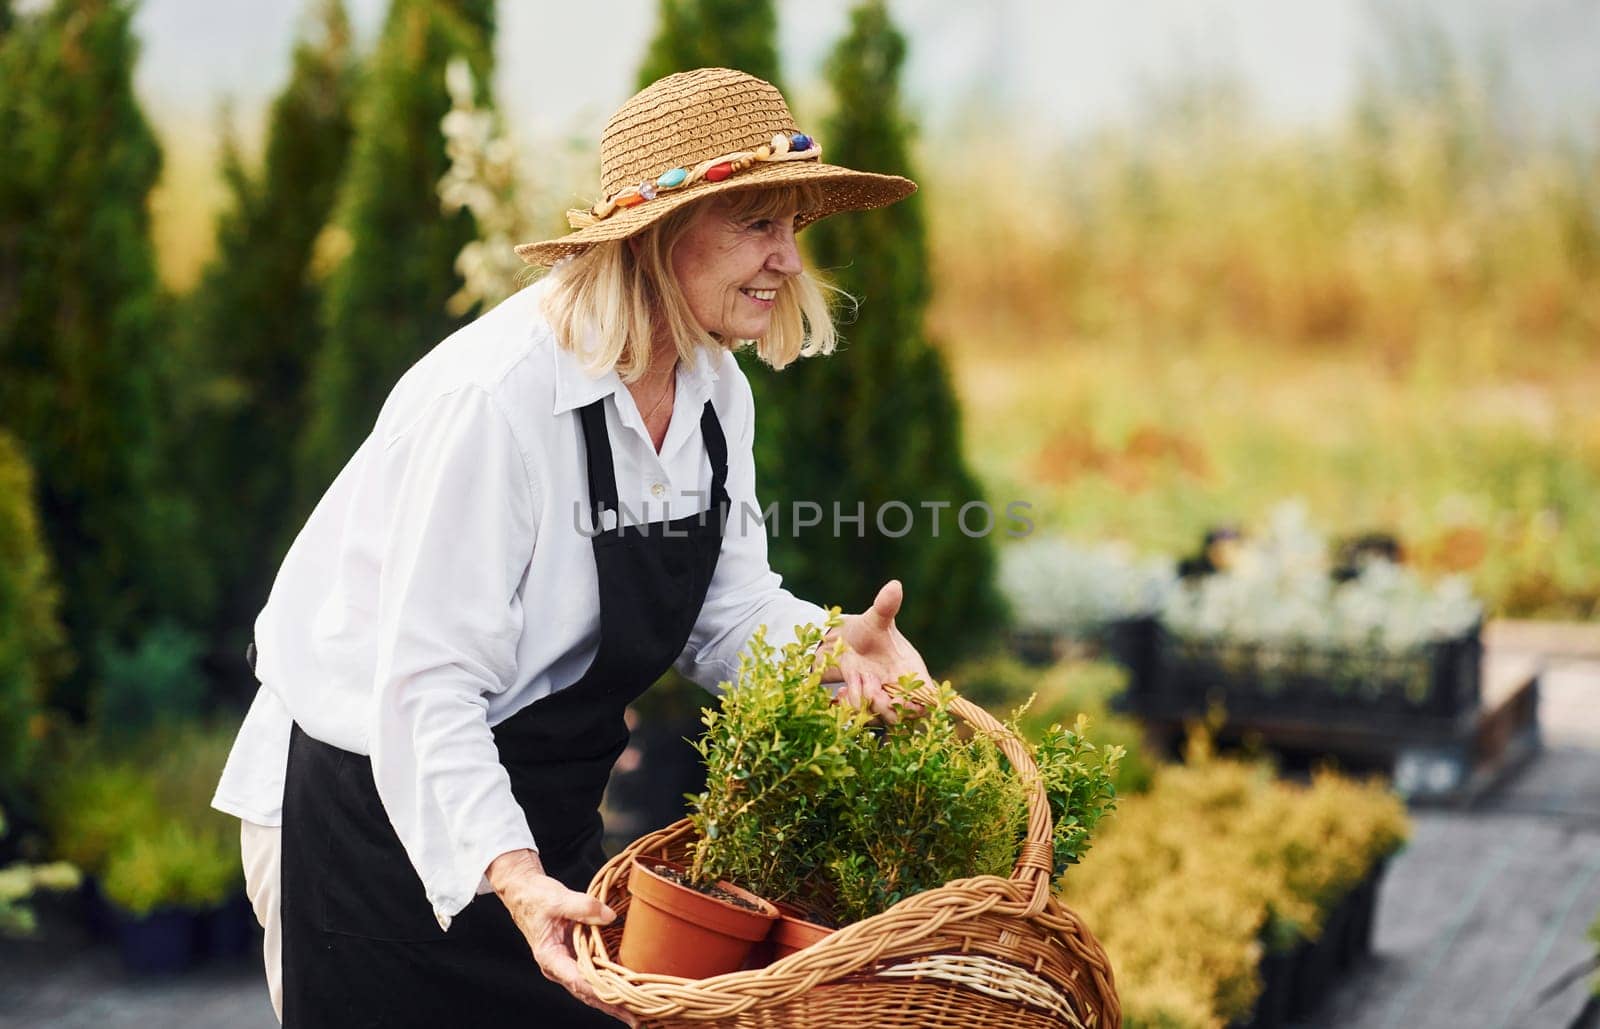 Taking plants in pots by using basket. Senior woman is in the garden at daytime. Conception of plants and seasons by Standret